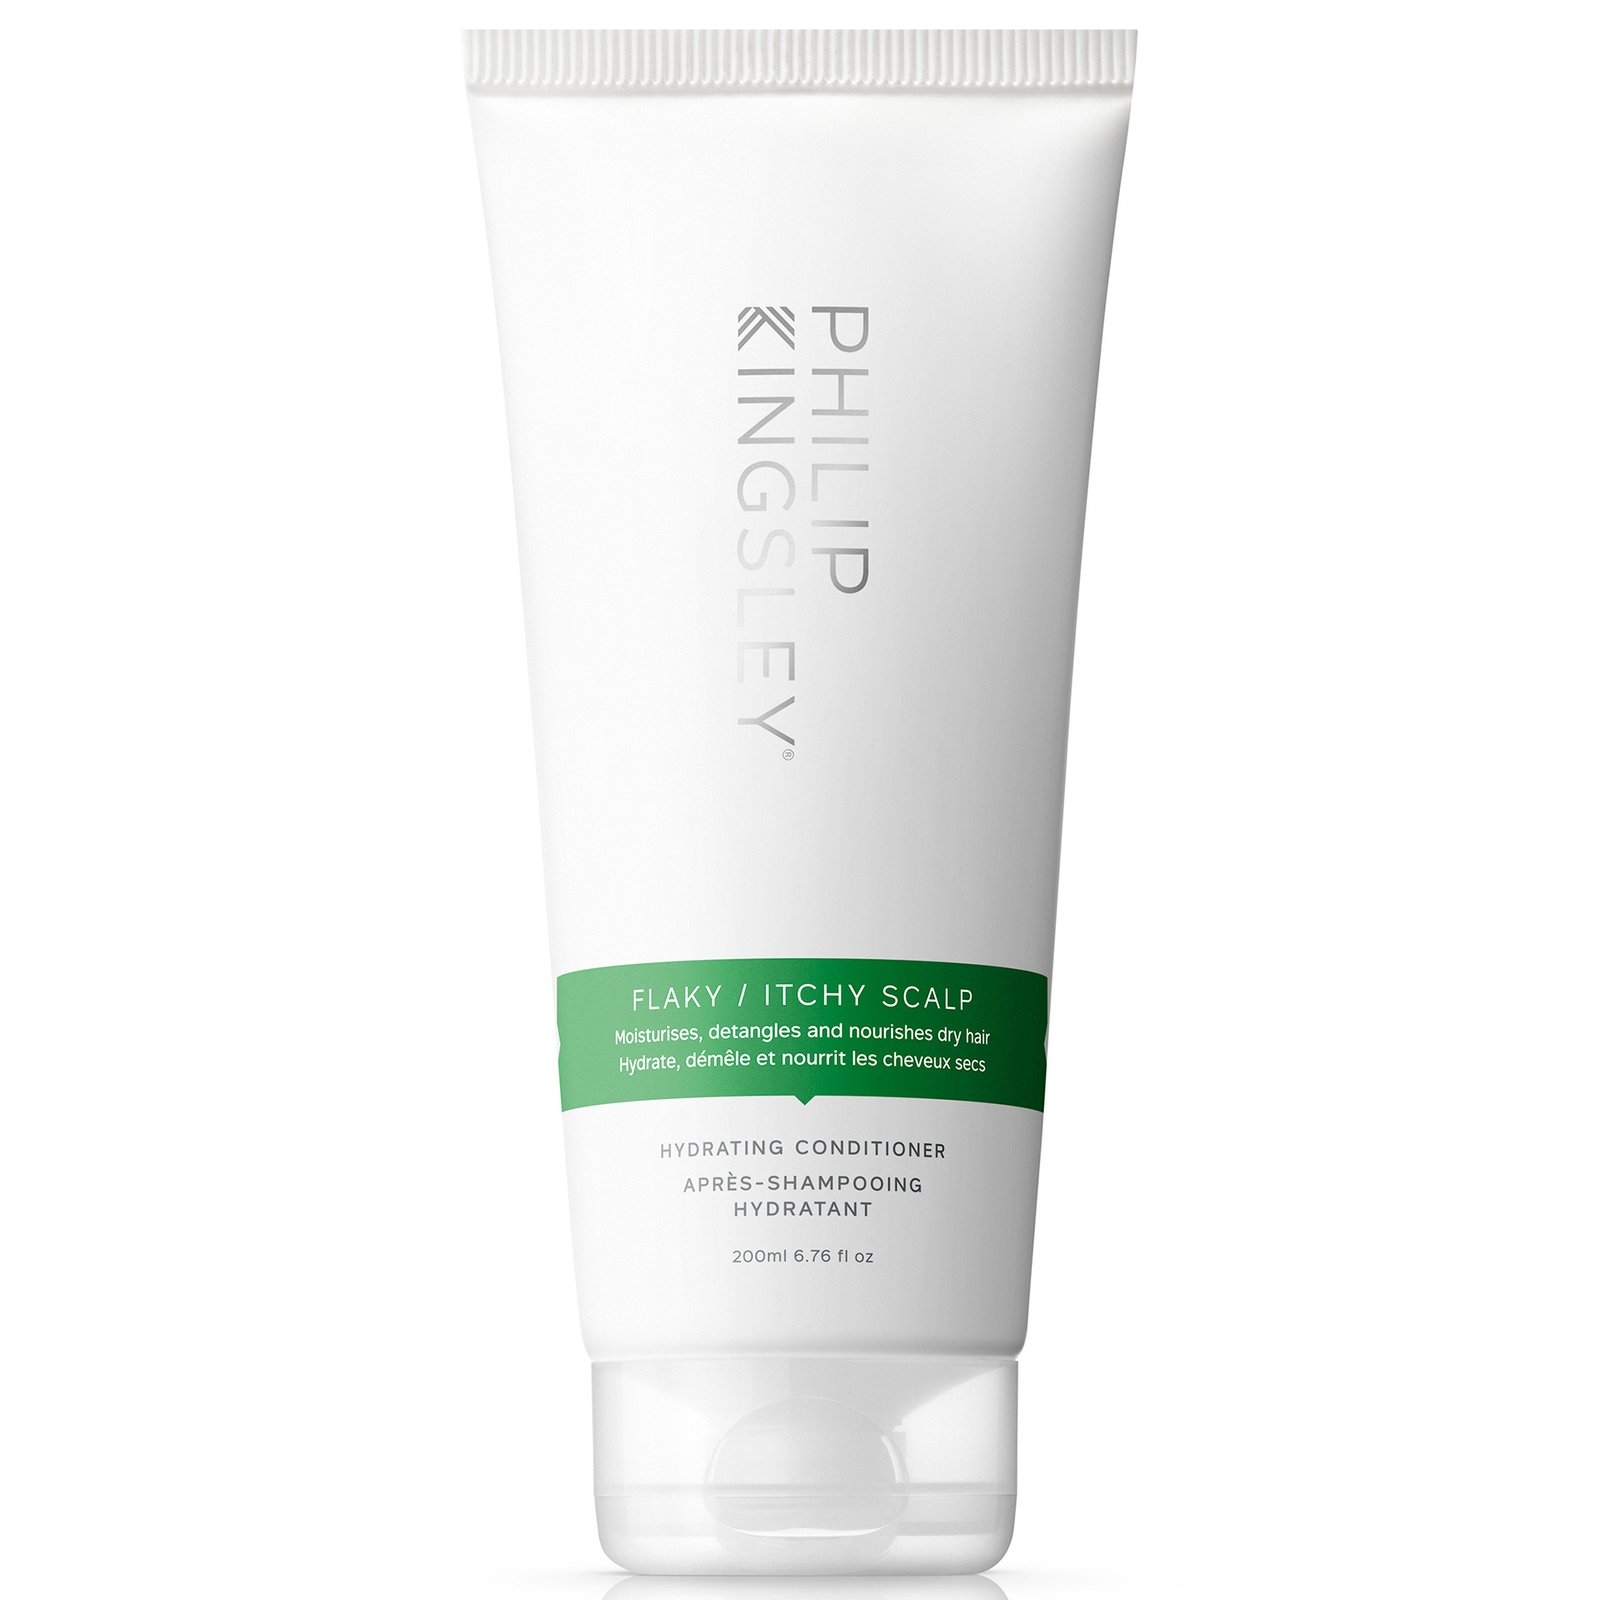 Image of Philip Kingsley Flaky/Itchy Scalp Conditioner 200ml